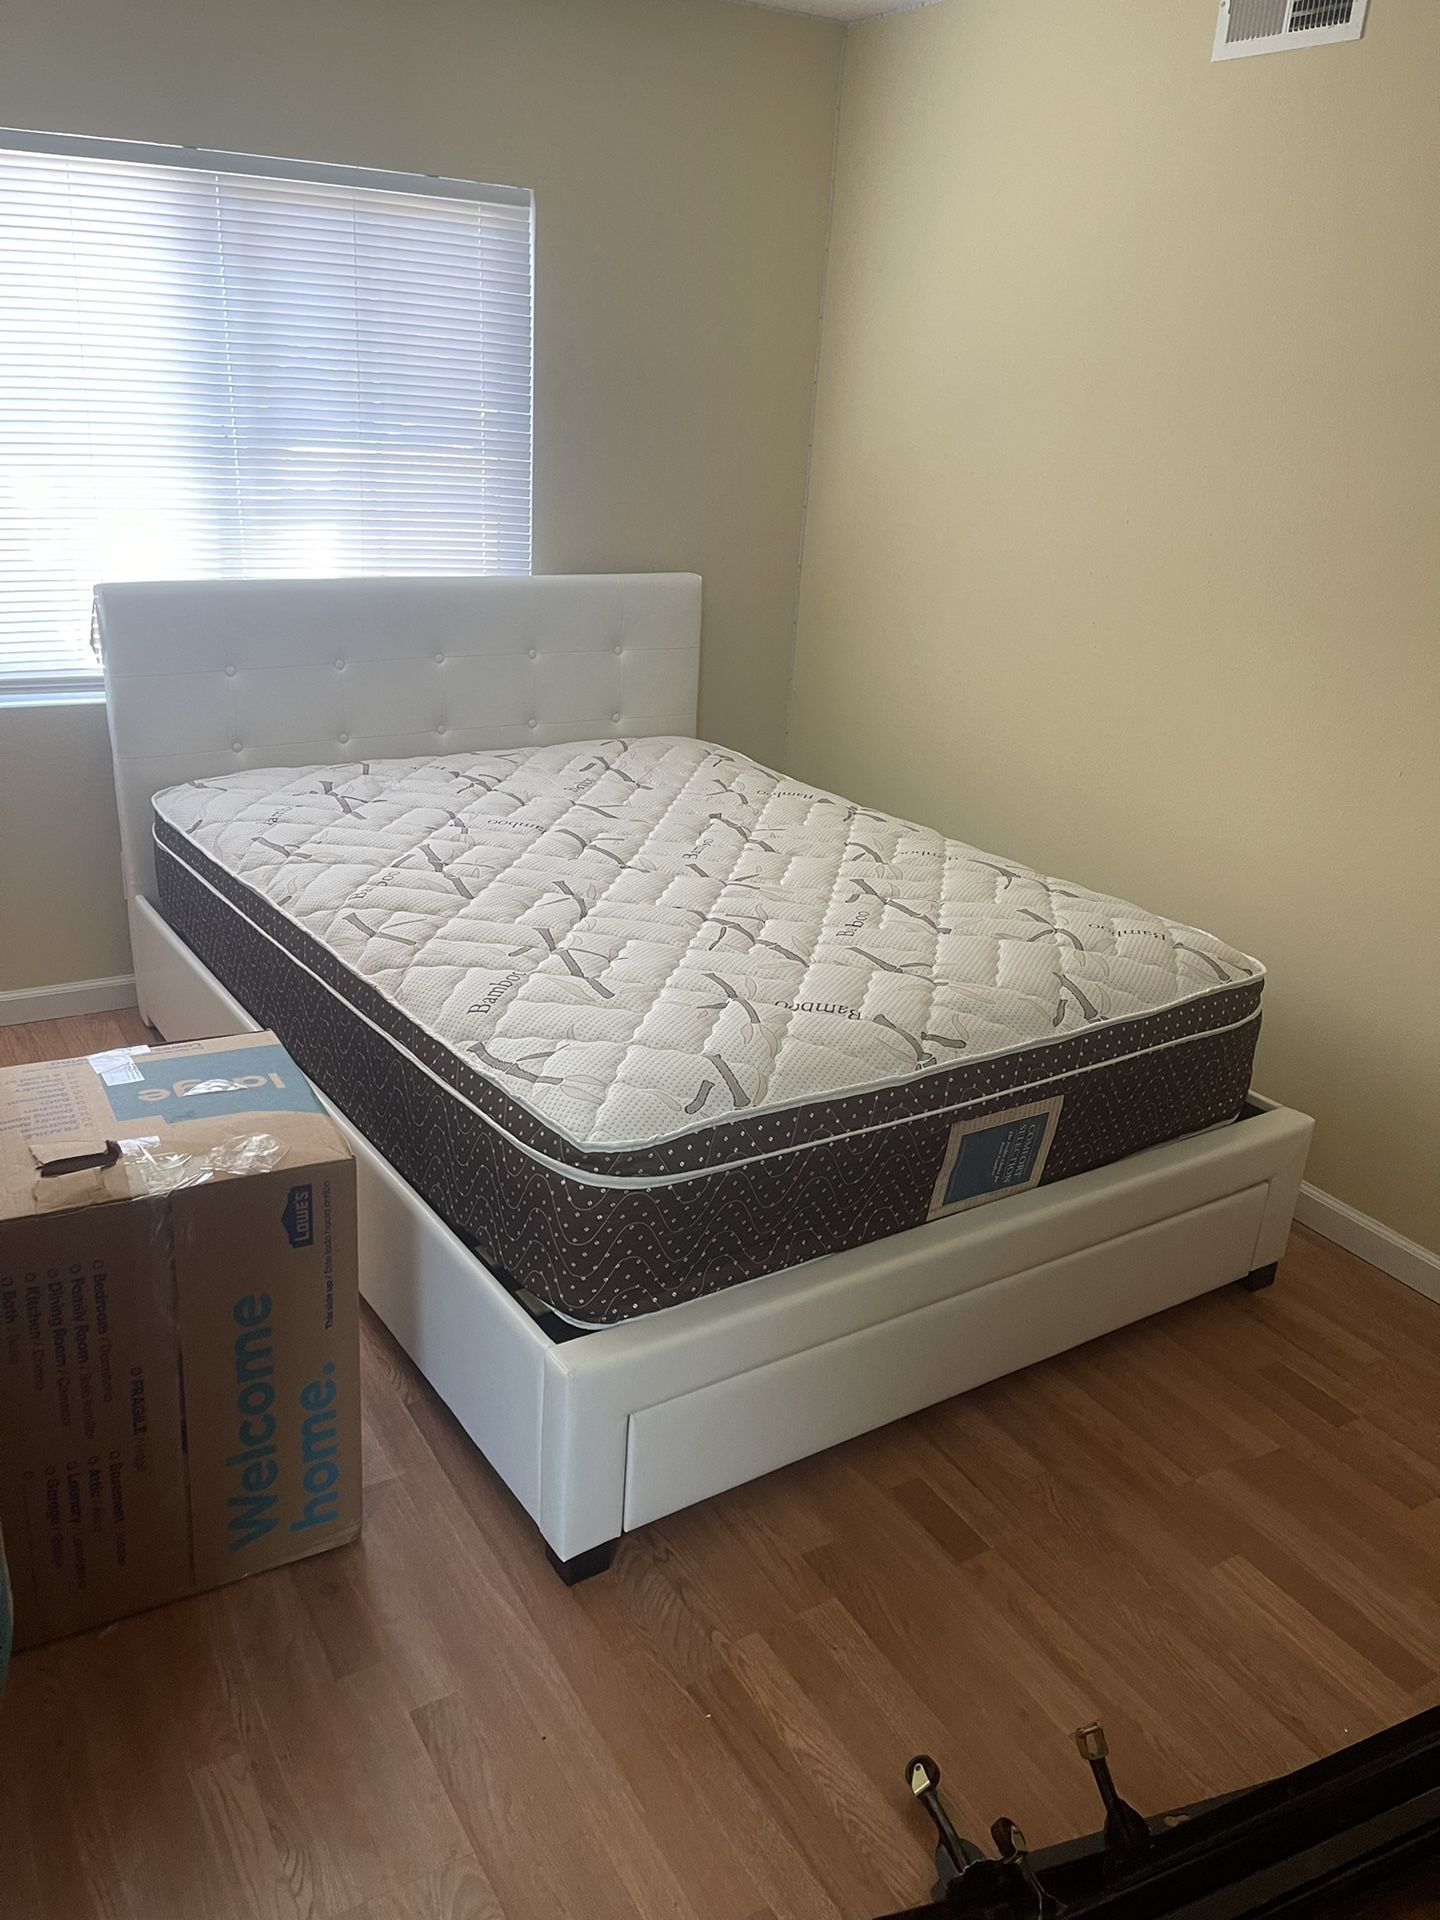 Queen Complete Bed With Bamboo Mattress Only $400 Full Size $385